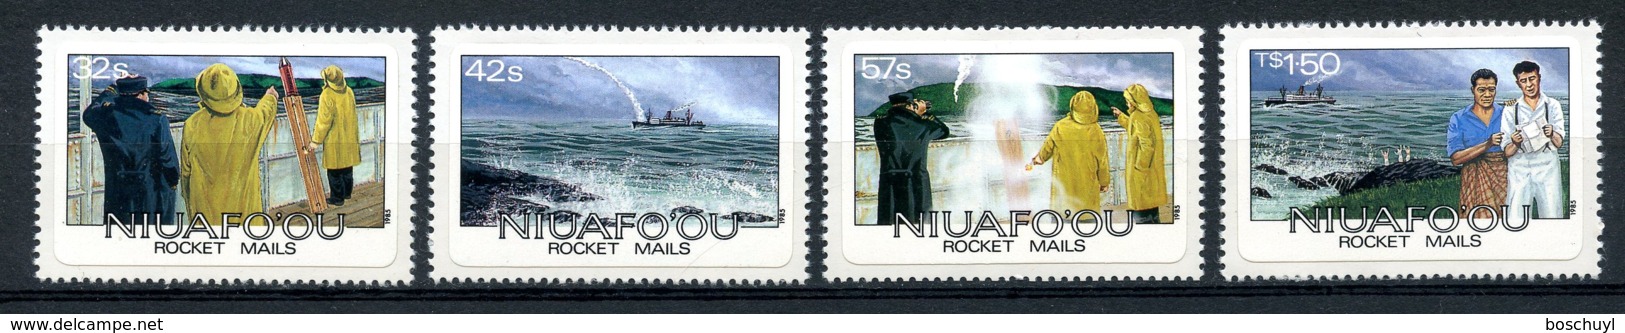 Niuafo'ou, Tin Can Island, 1985, Rocket Mail, Boats, MNH, Michel 61-64 - Autres - Océanie